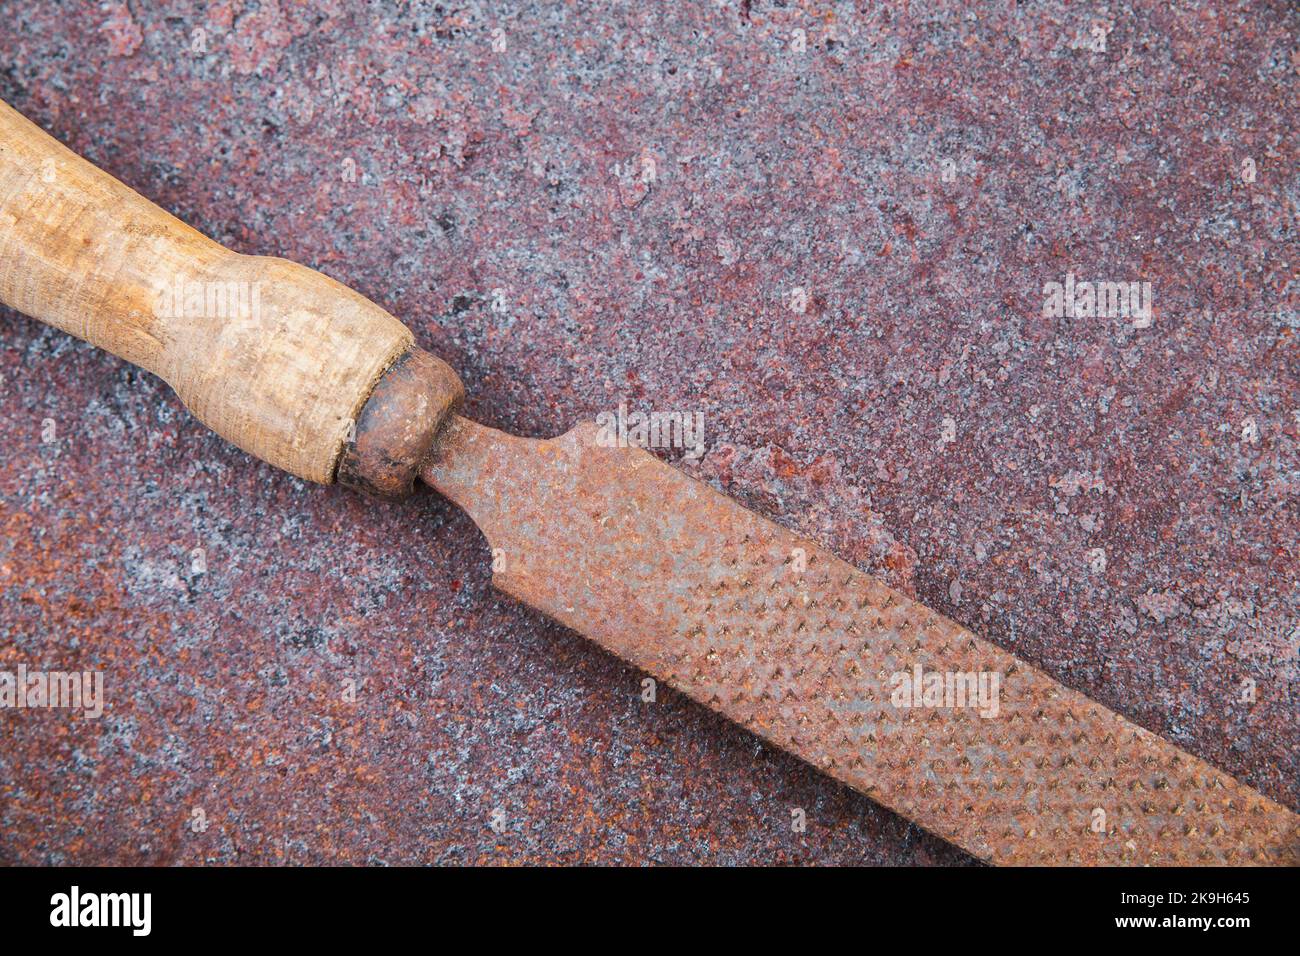 old file on rusty rough metal surface Stock Photo